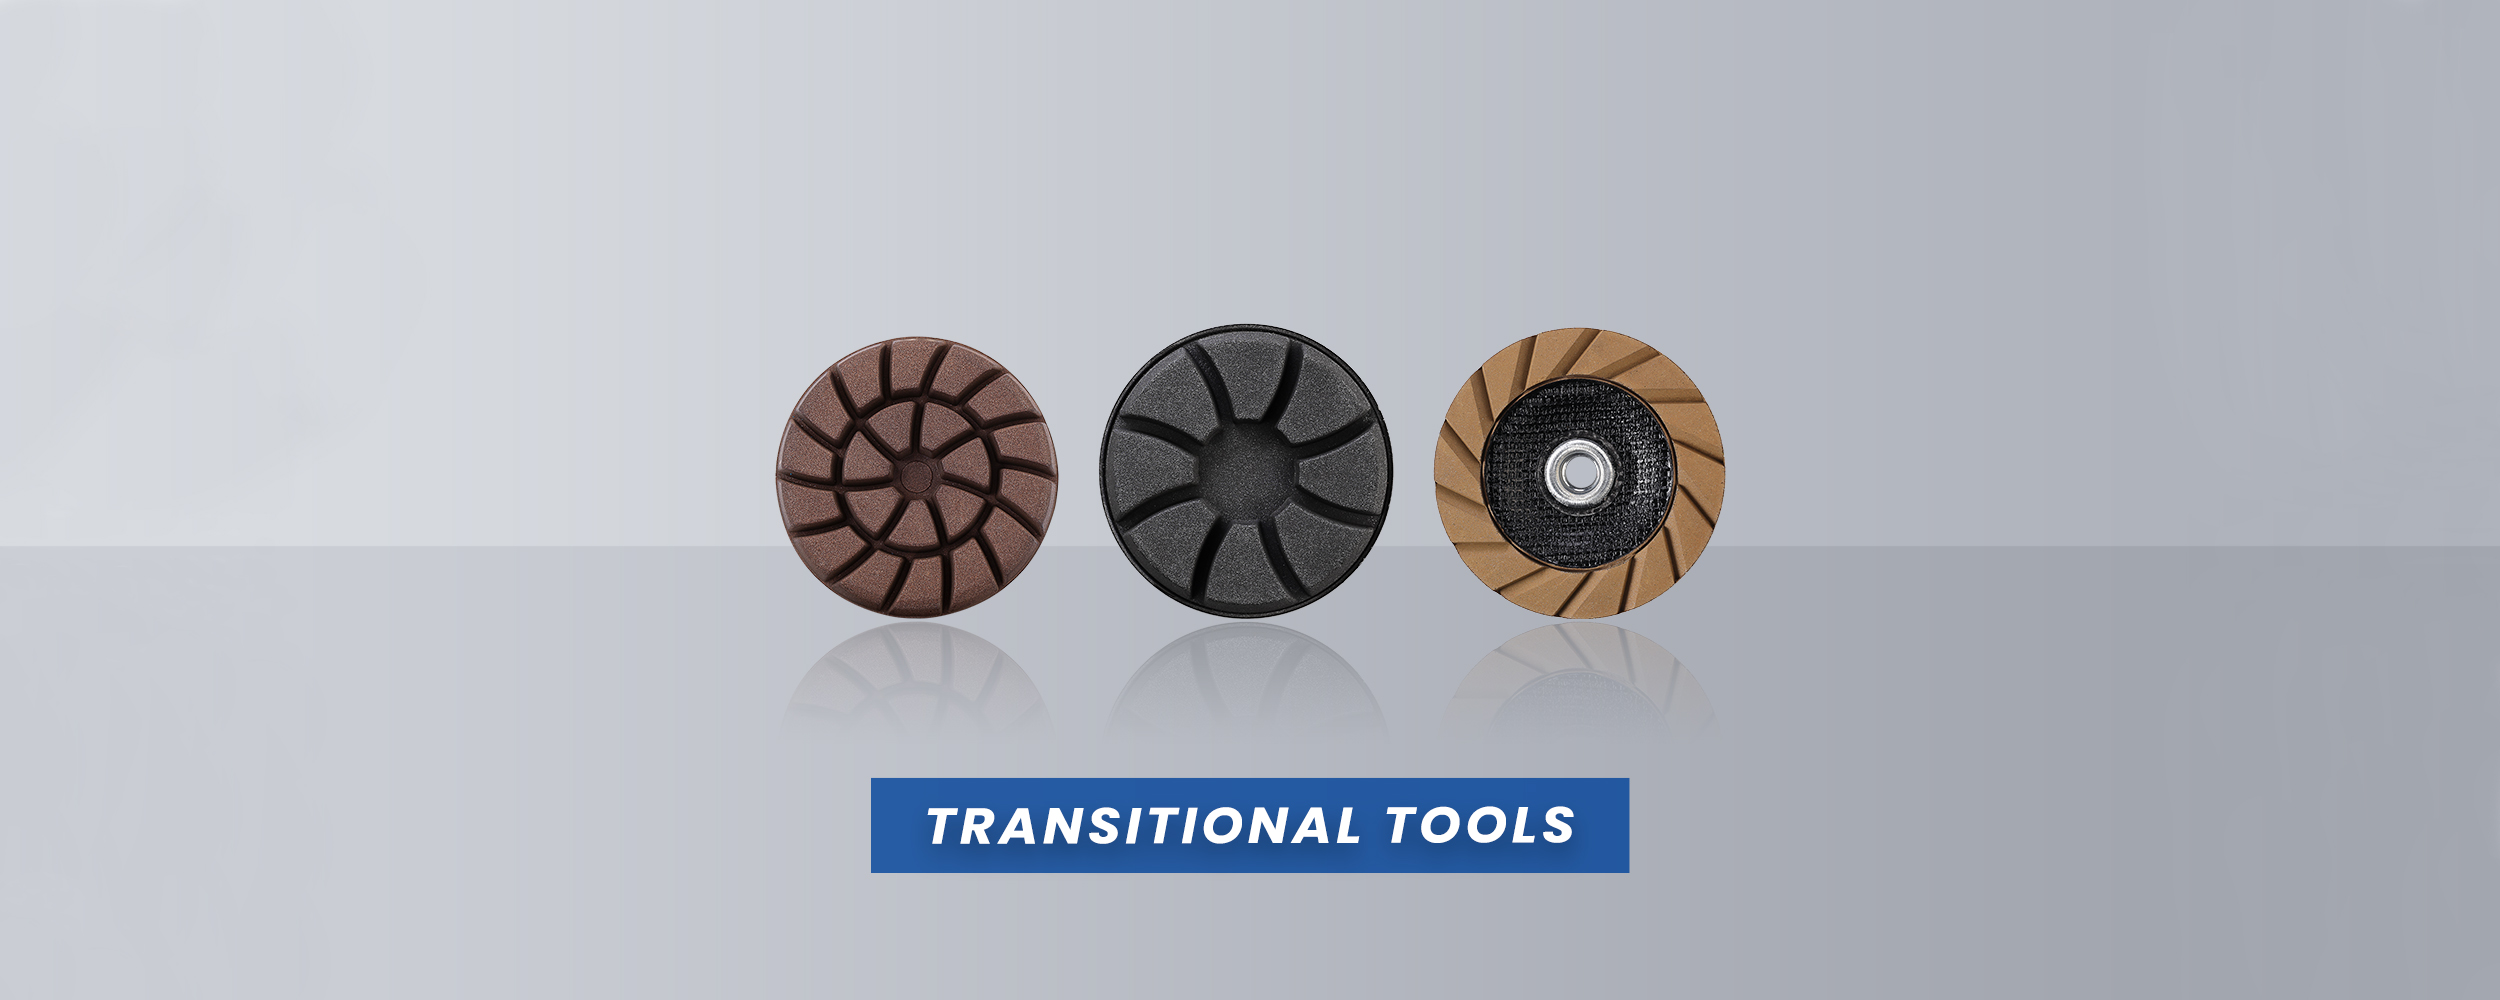 Transitional Tools